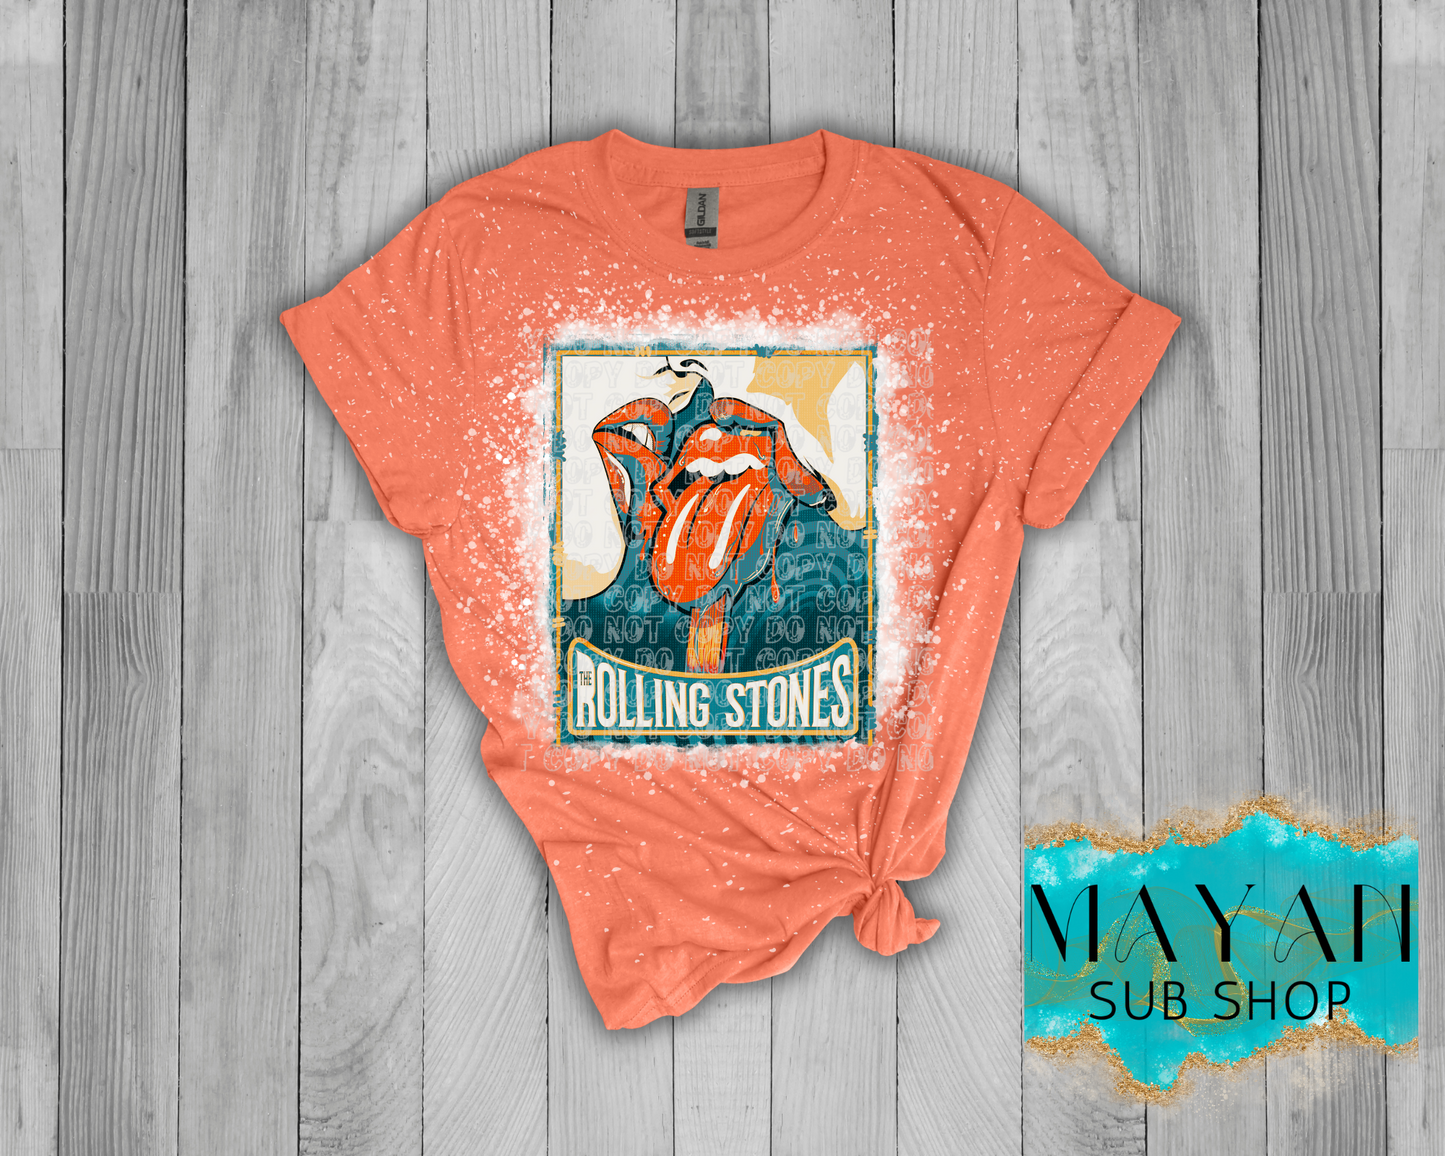 Rolling Stones Bleached Shirt - Mayan Sub Shop